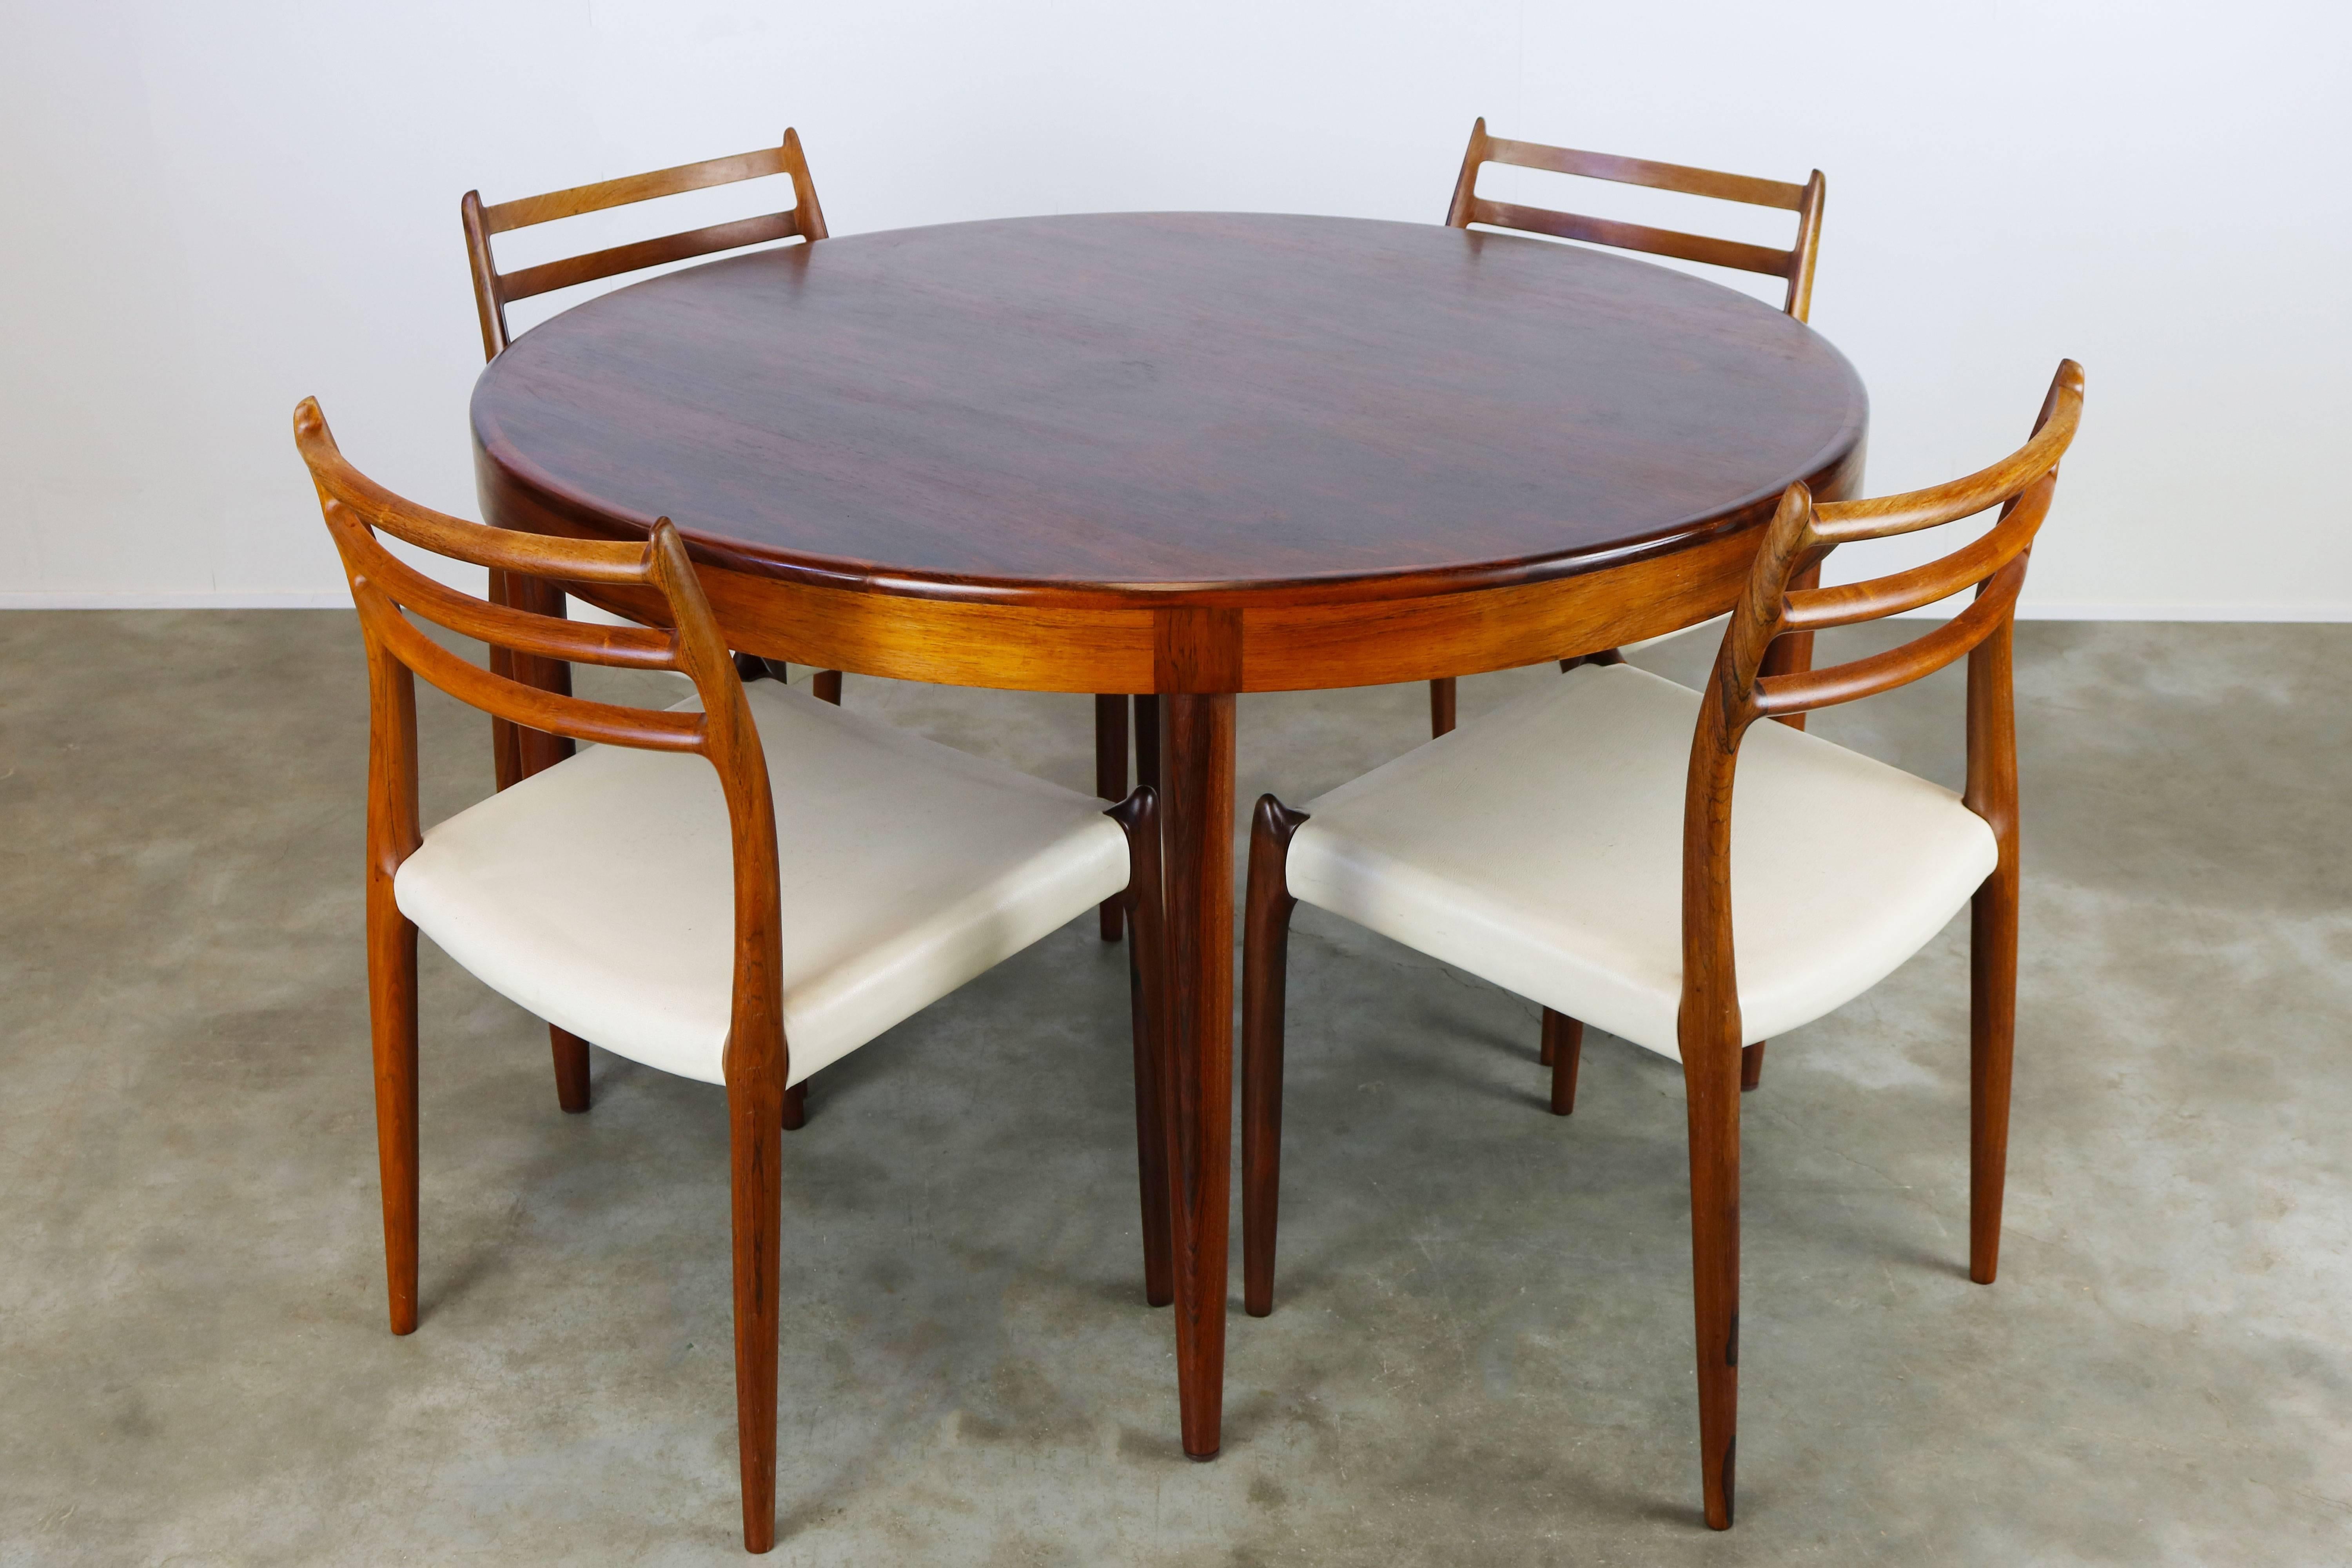 Magnificent Danish dining room set by Niels Otto Møller for JL Moller Mobelfabrik, 1950 in solid Rosewood. The set consists of four rosewood and white leather model.78 chairs and original matching round rosewood table. Set is in wonderful original